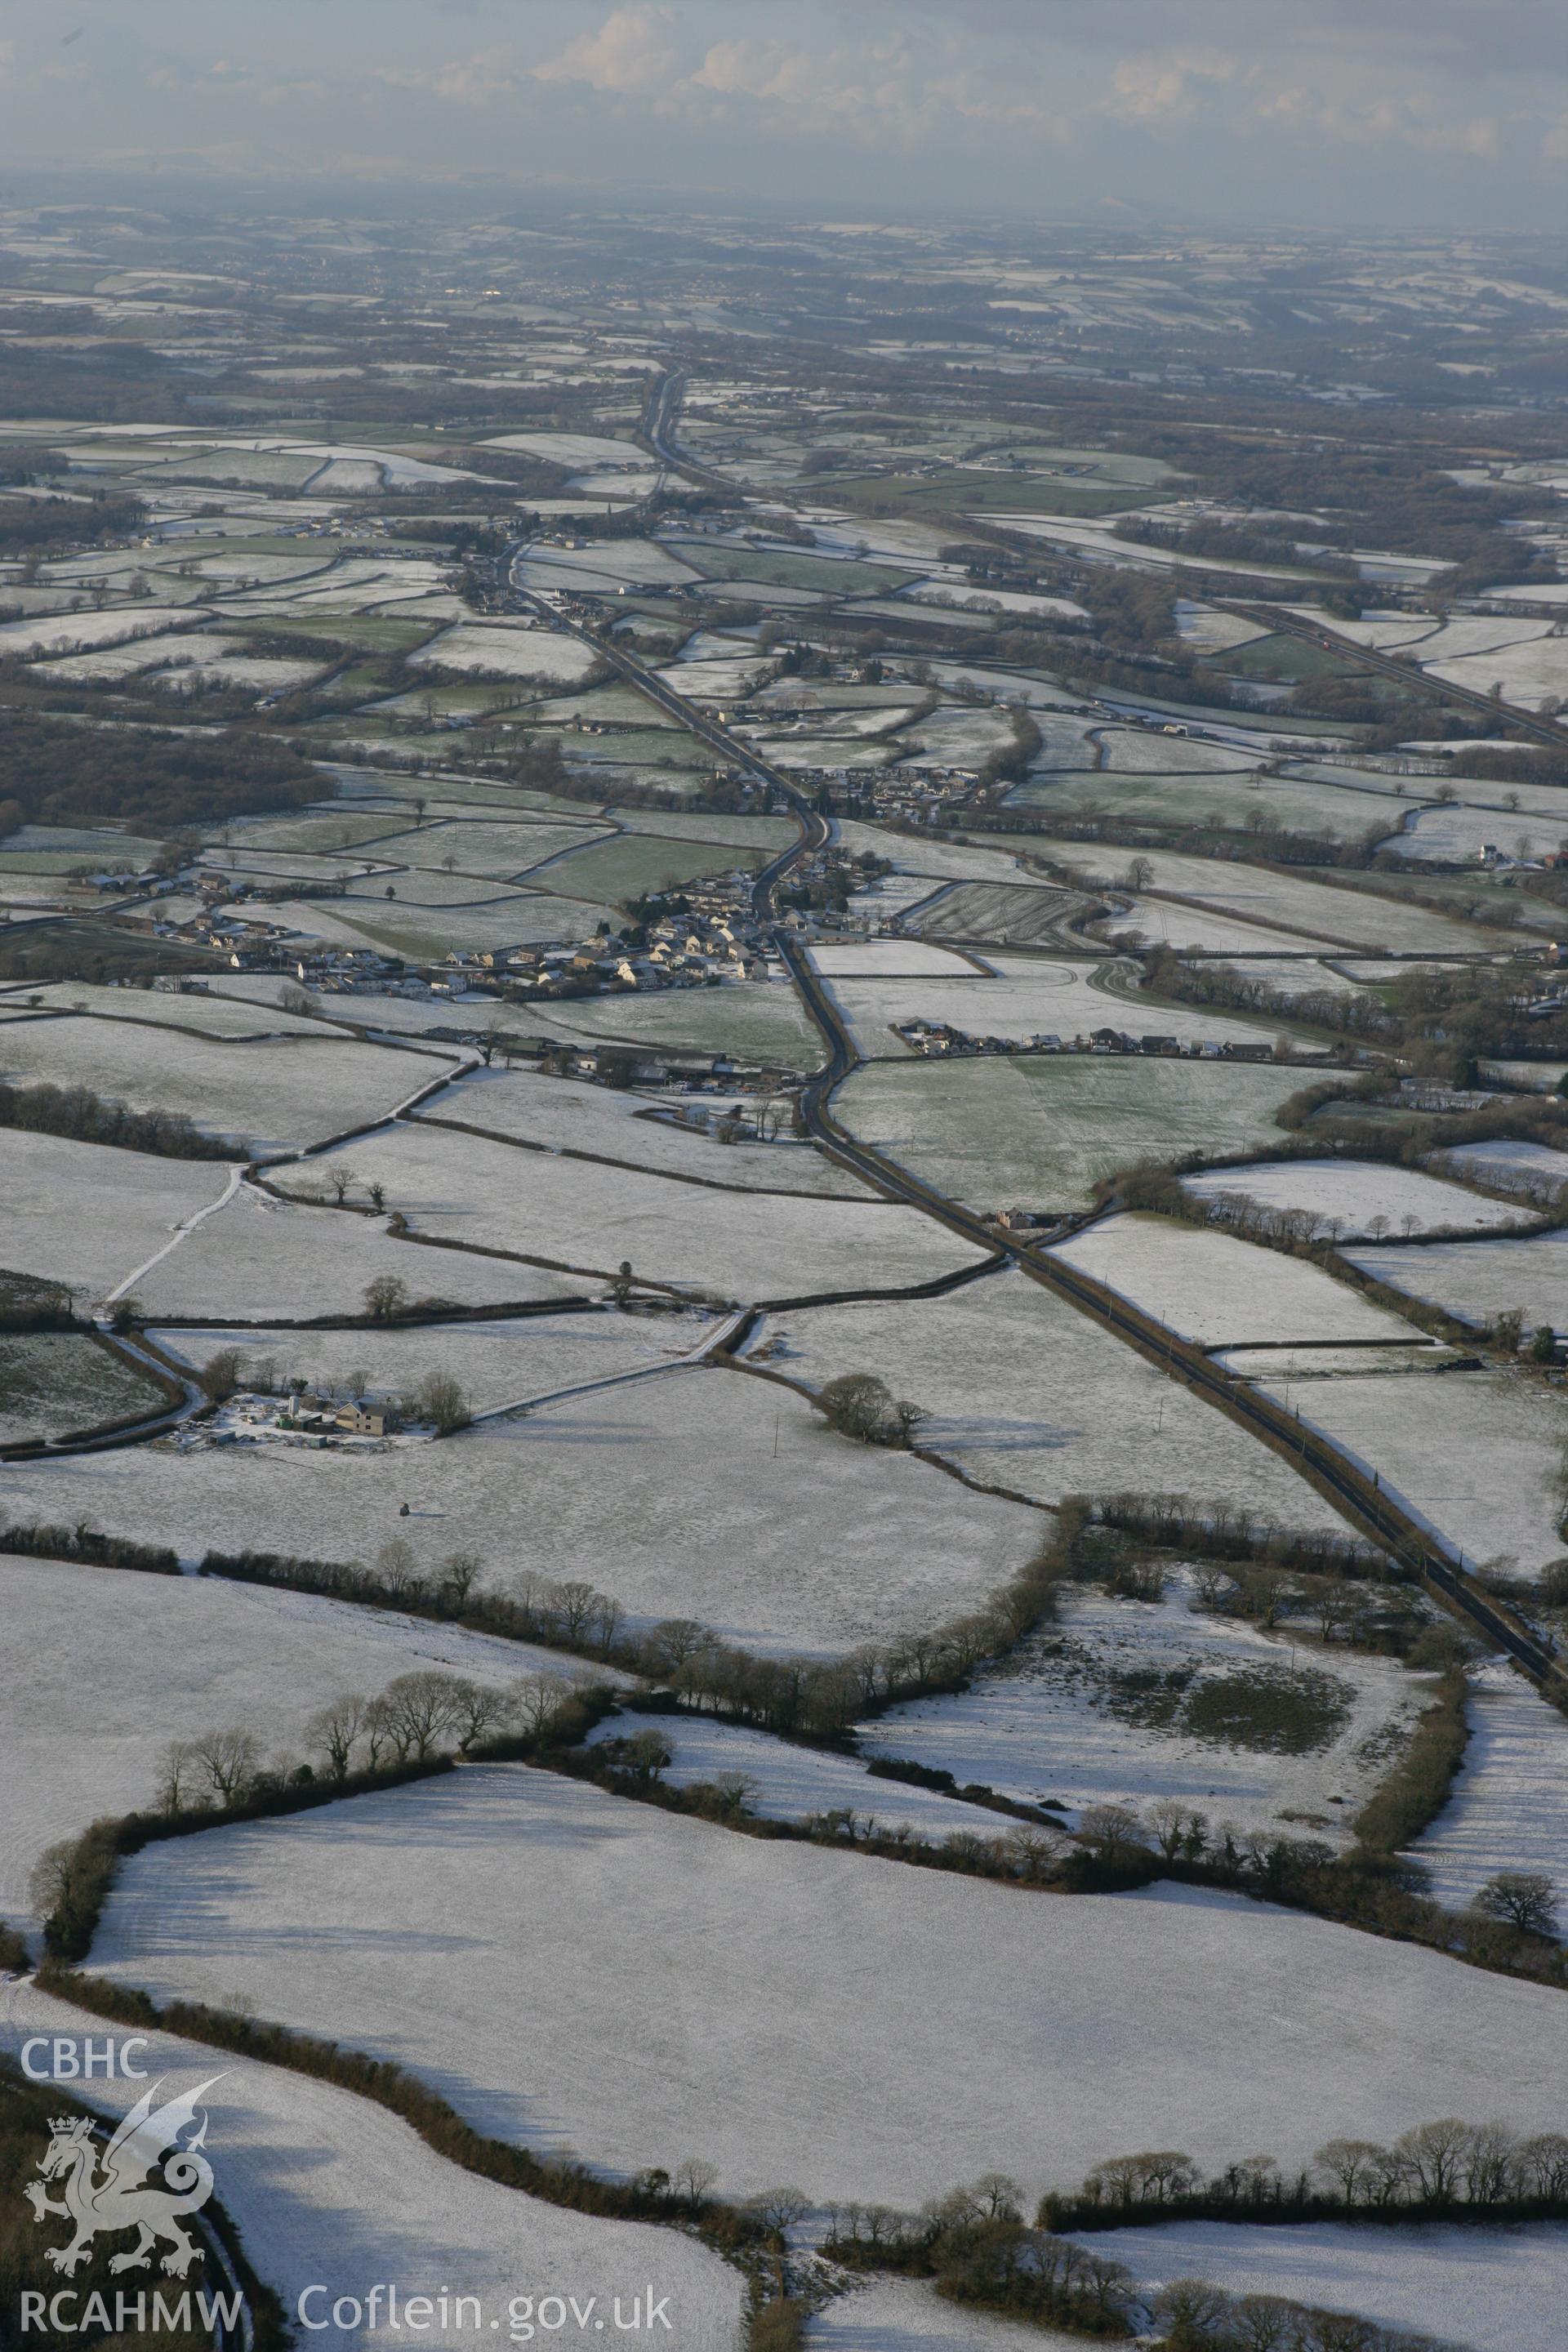 RCAHMW colour oblique photograph of Porthyrhyd, winter landscape from the south-east. Taken by Toby Driver on 01/12/2010.